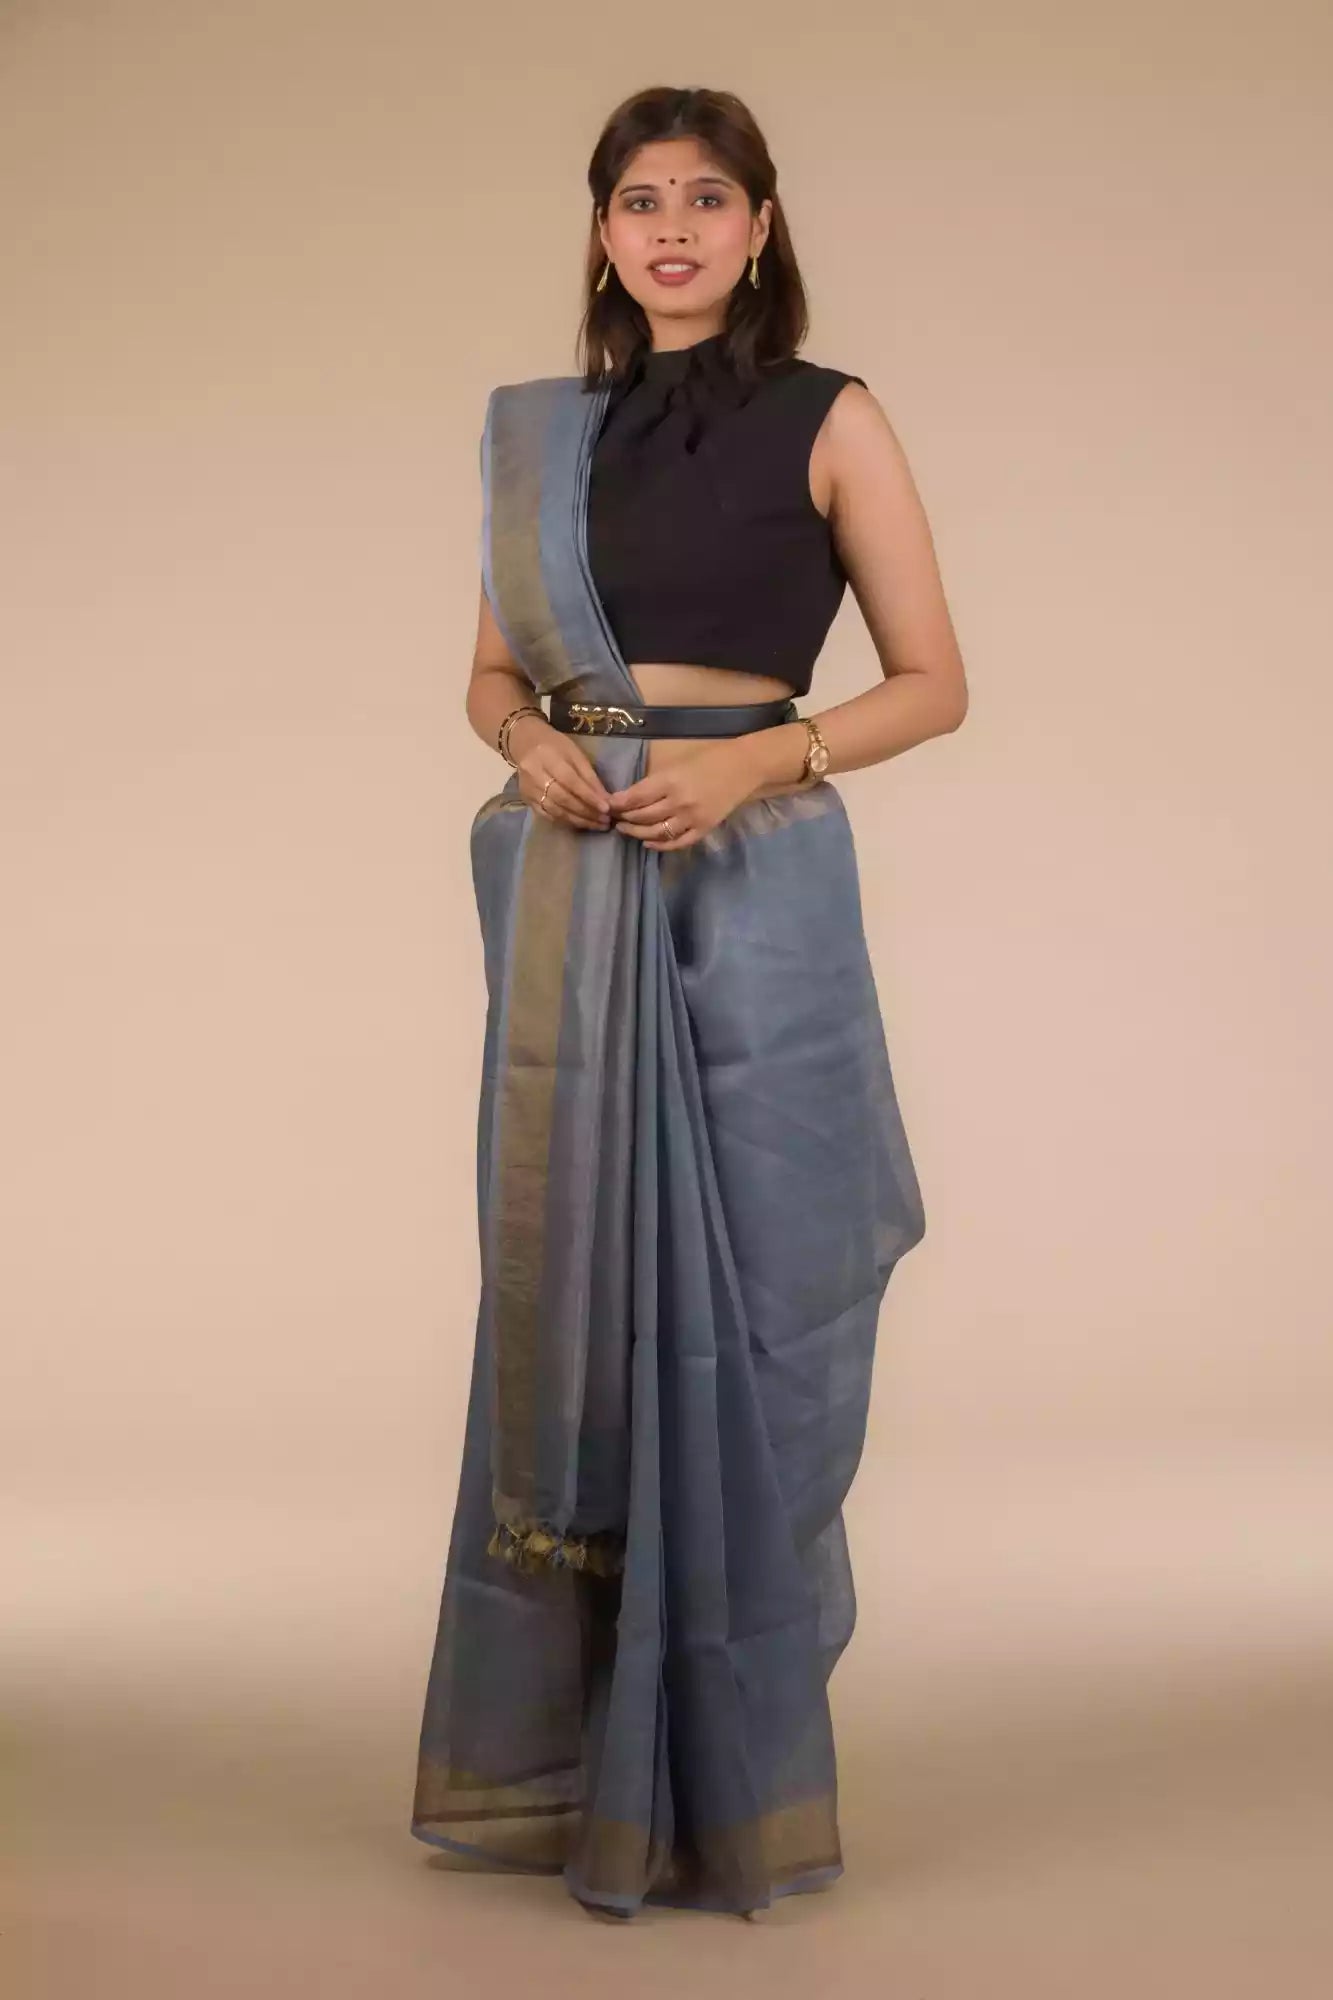 Front view of a woman in a grey saree with dark colored sleeveless blouse and a belt around her waist